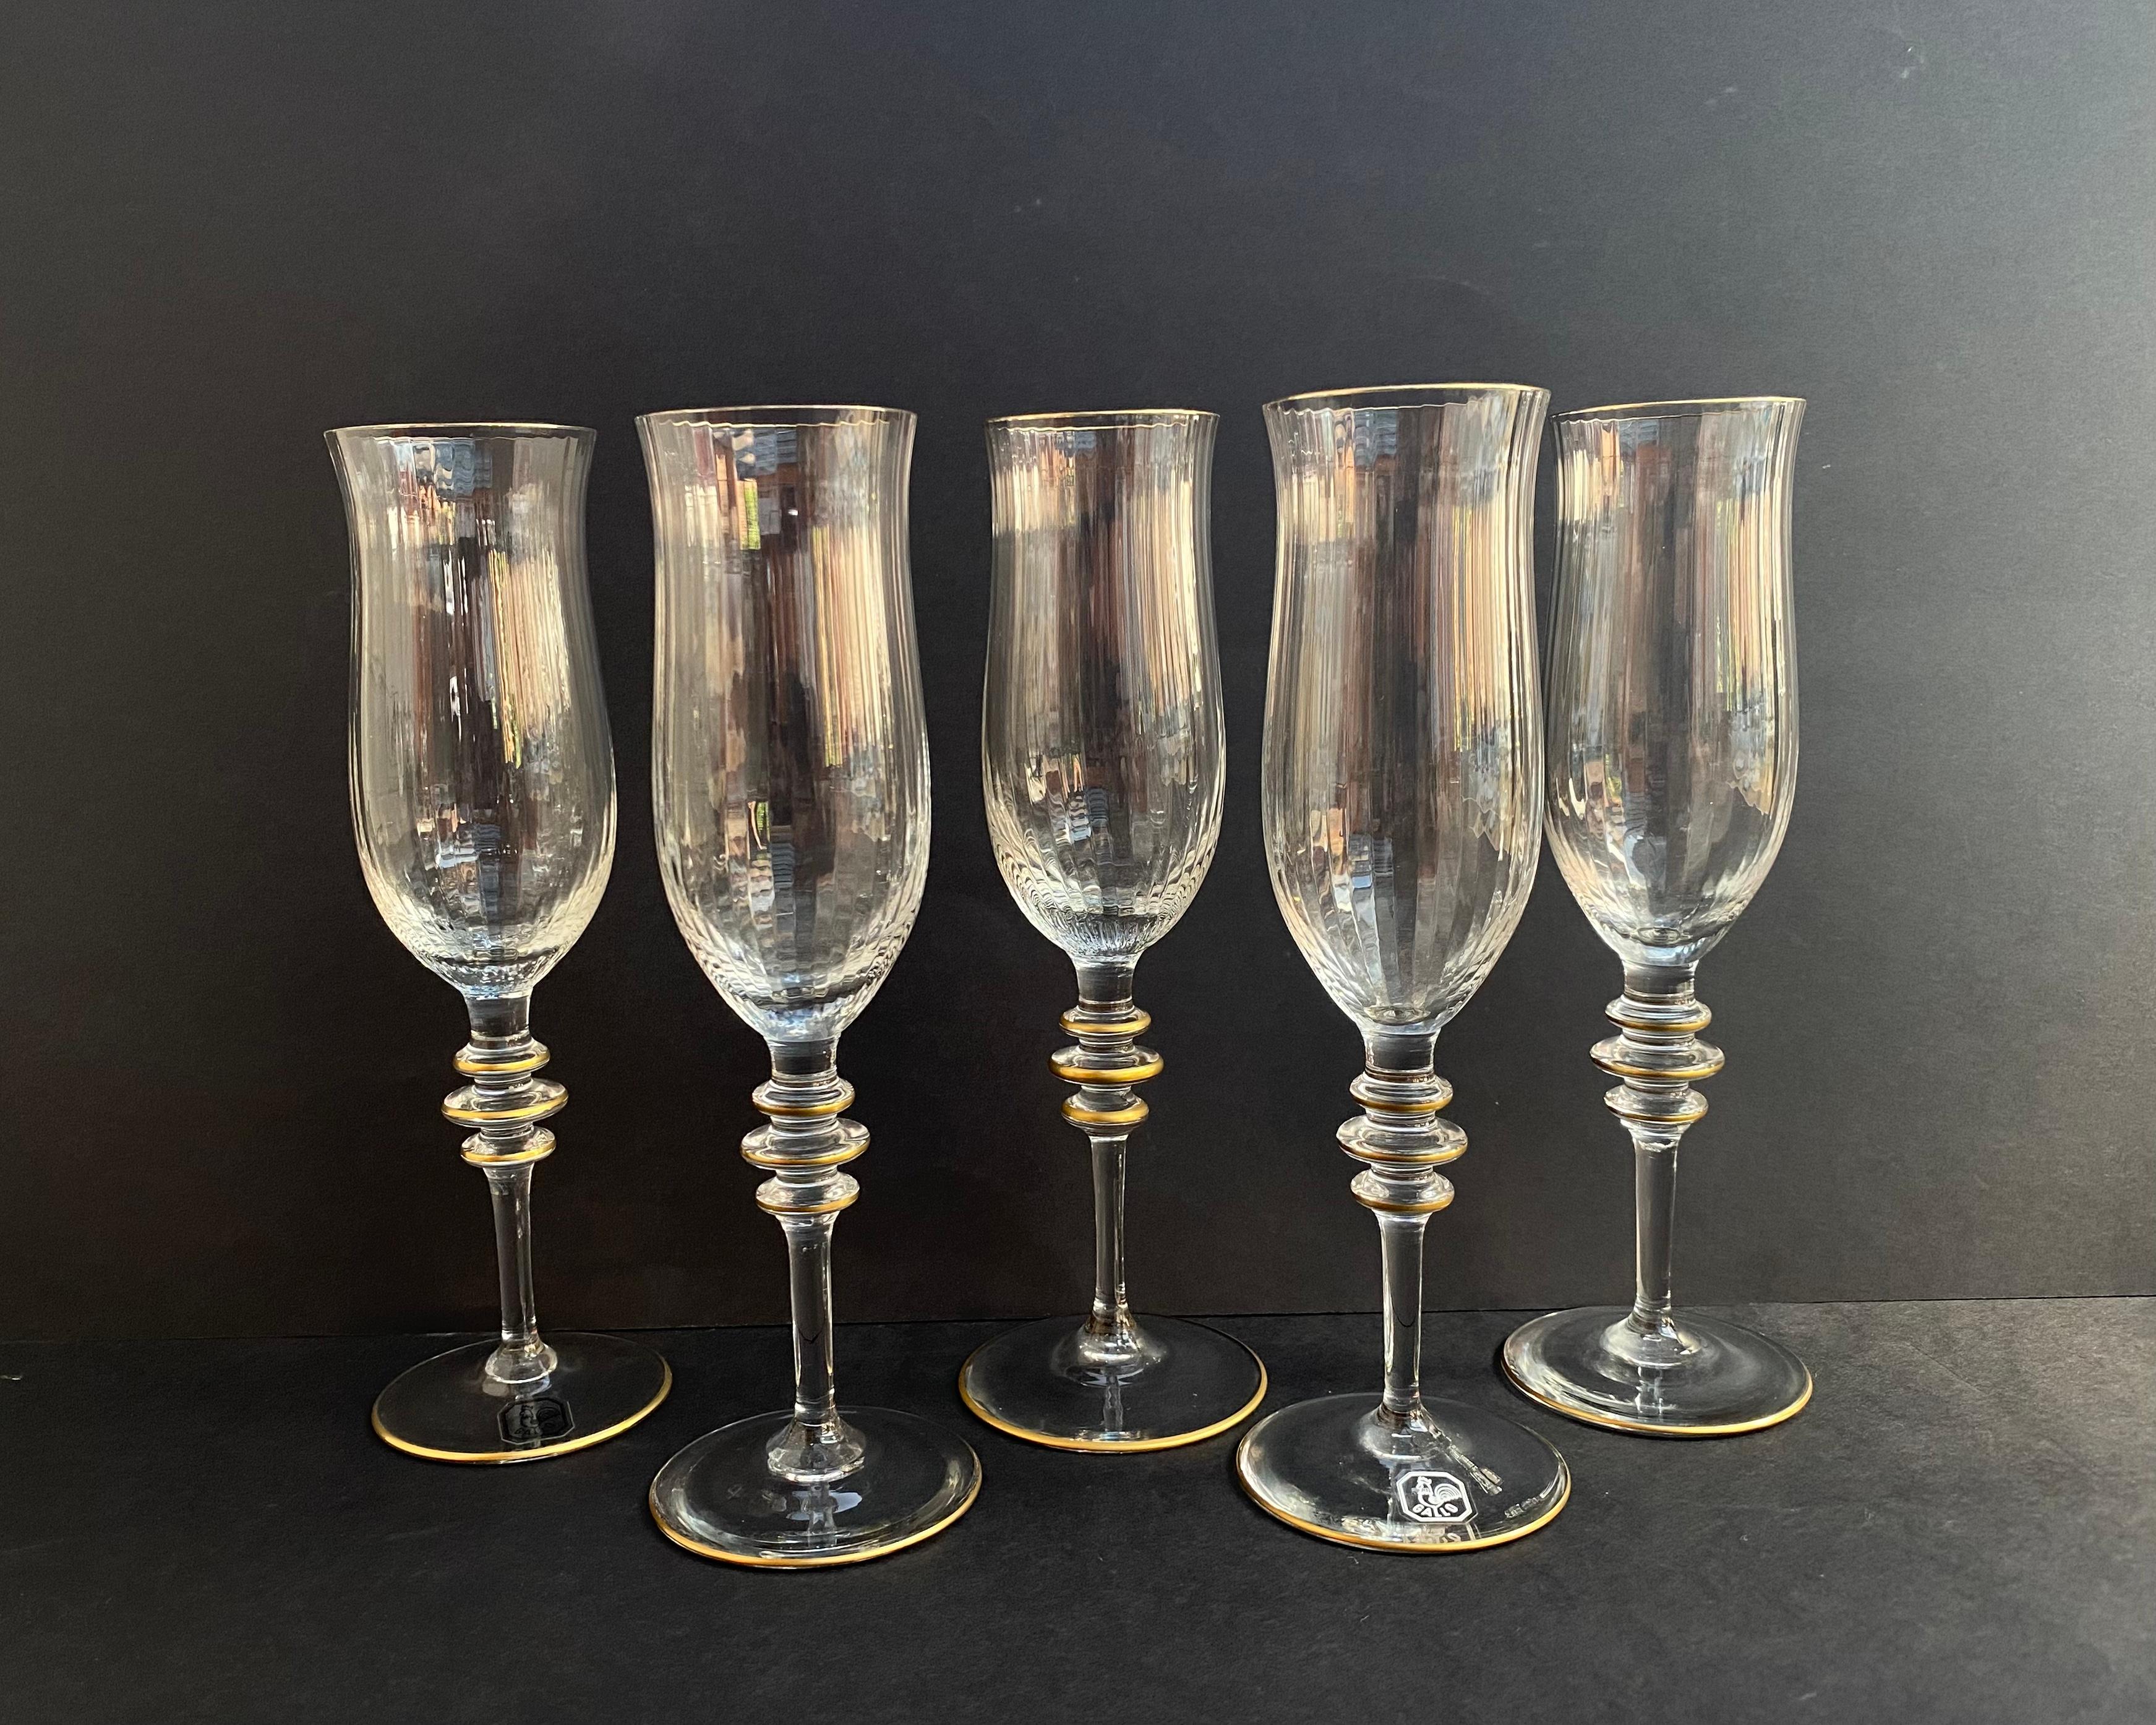 Elegant Rare Set of 5 ice effect Crystal Glasses with gilding and embossed surface by German manufactory Gallo. 1980s.

Products are equipped with high legs and are designed to serve champagne, wine or other liquids.

The glasses are hand-cut